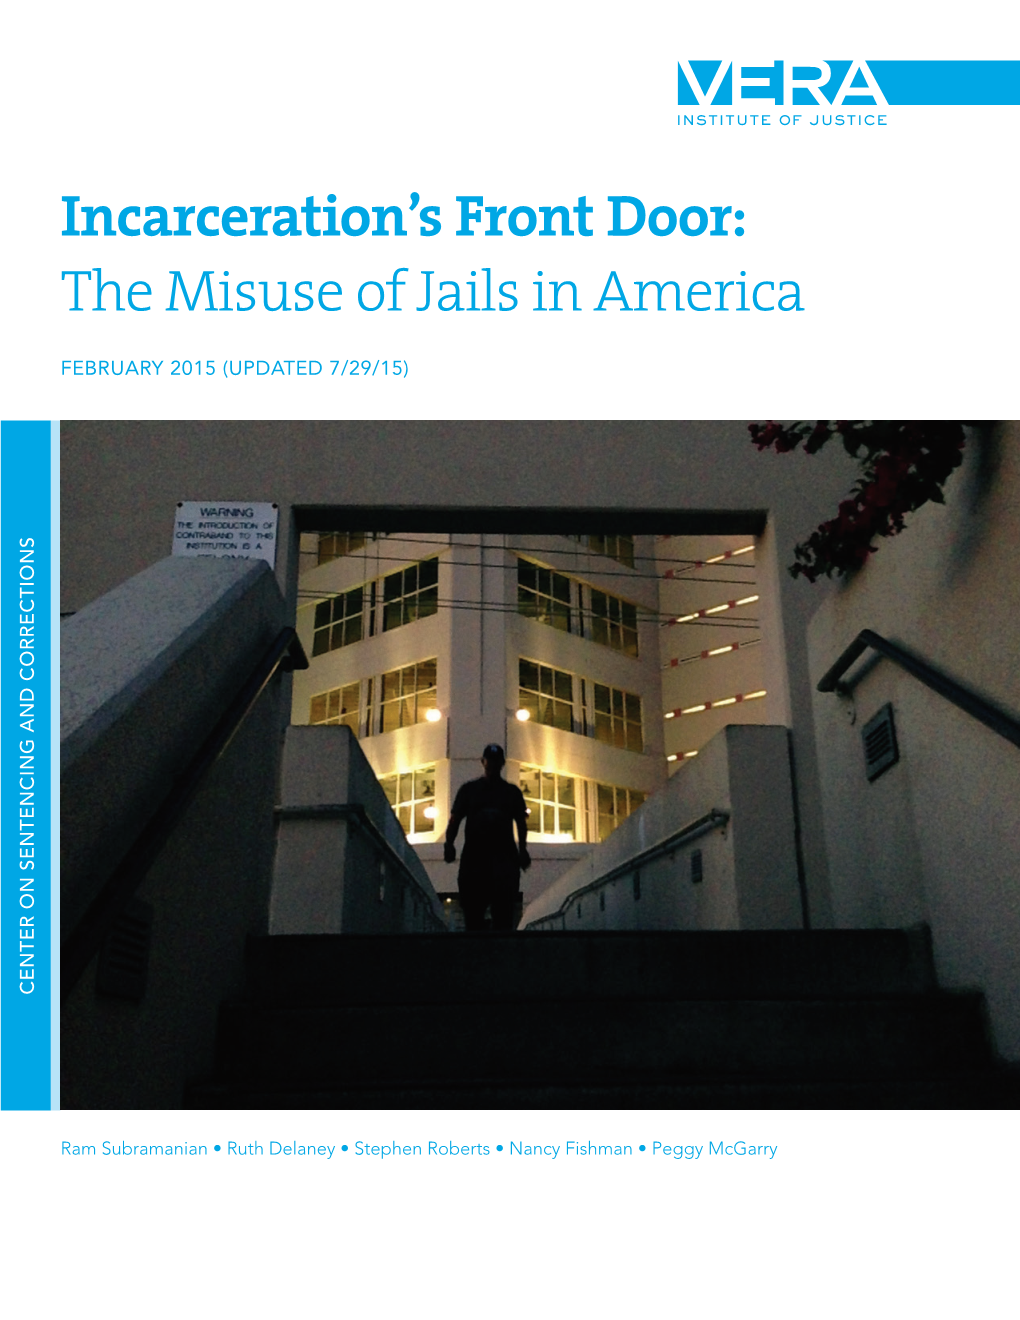 Incarceration's Front Door: the Misuse of Jails in America